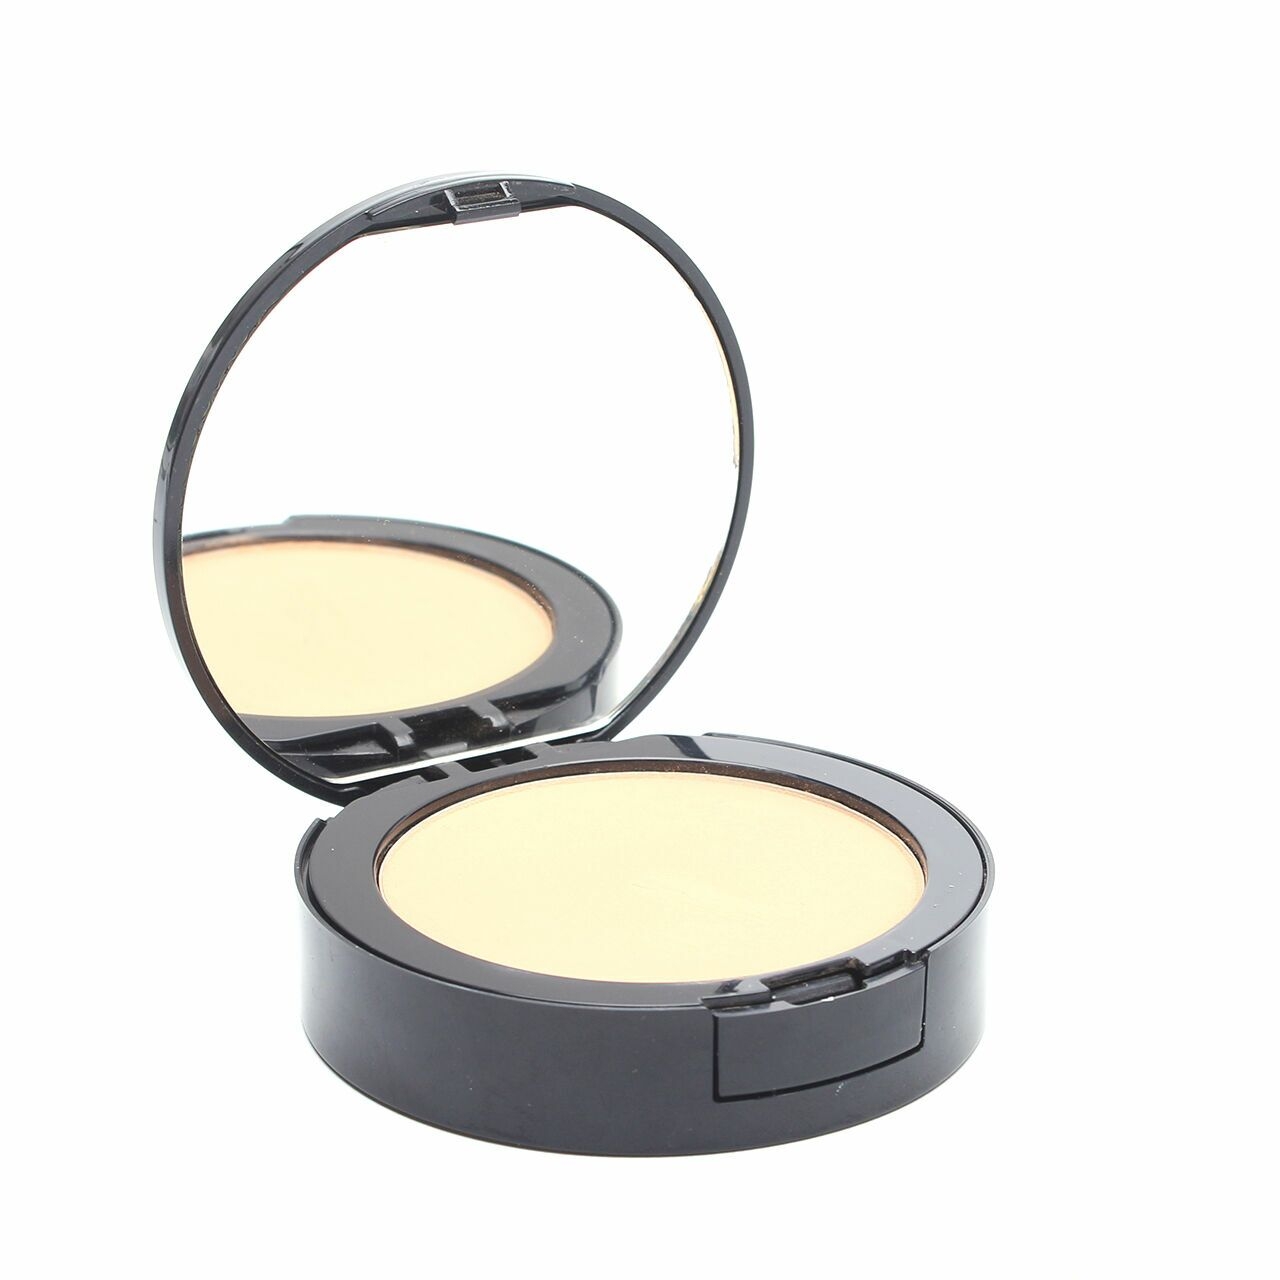 Laroche Posay Compact Powder Mineral Foundation 14 Beige Rose Faces